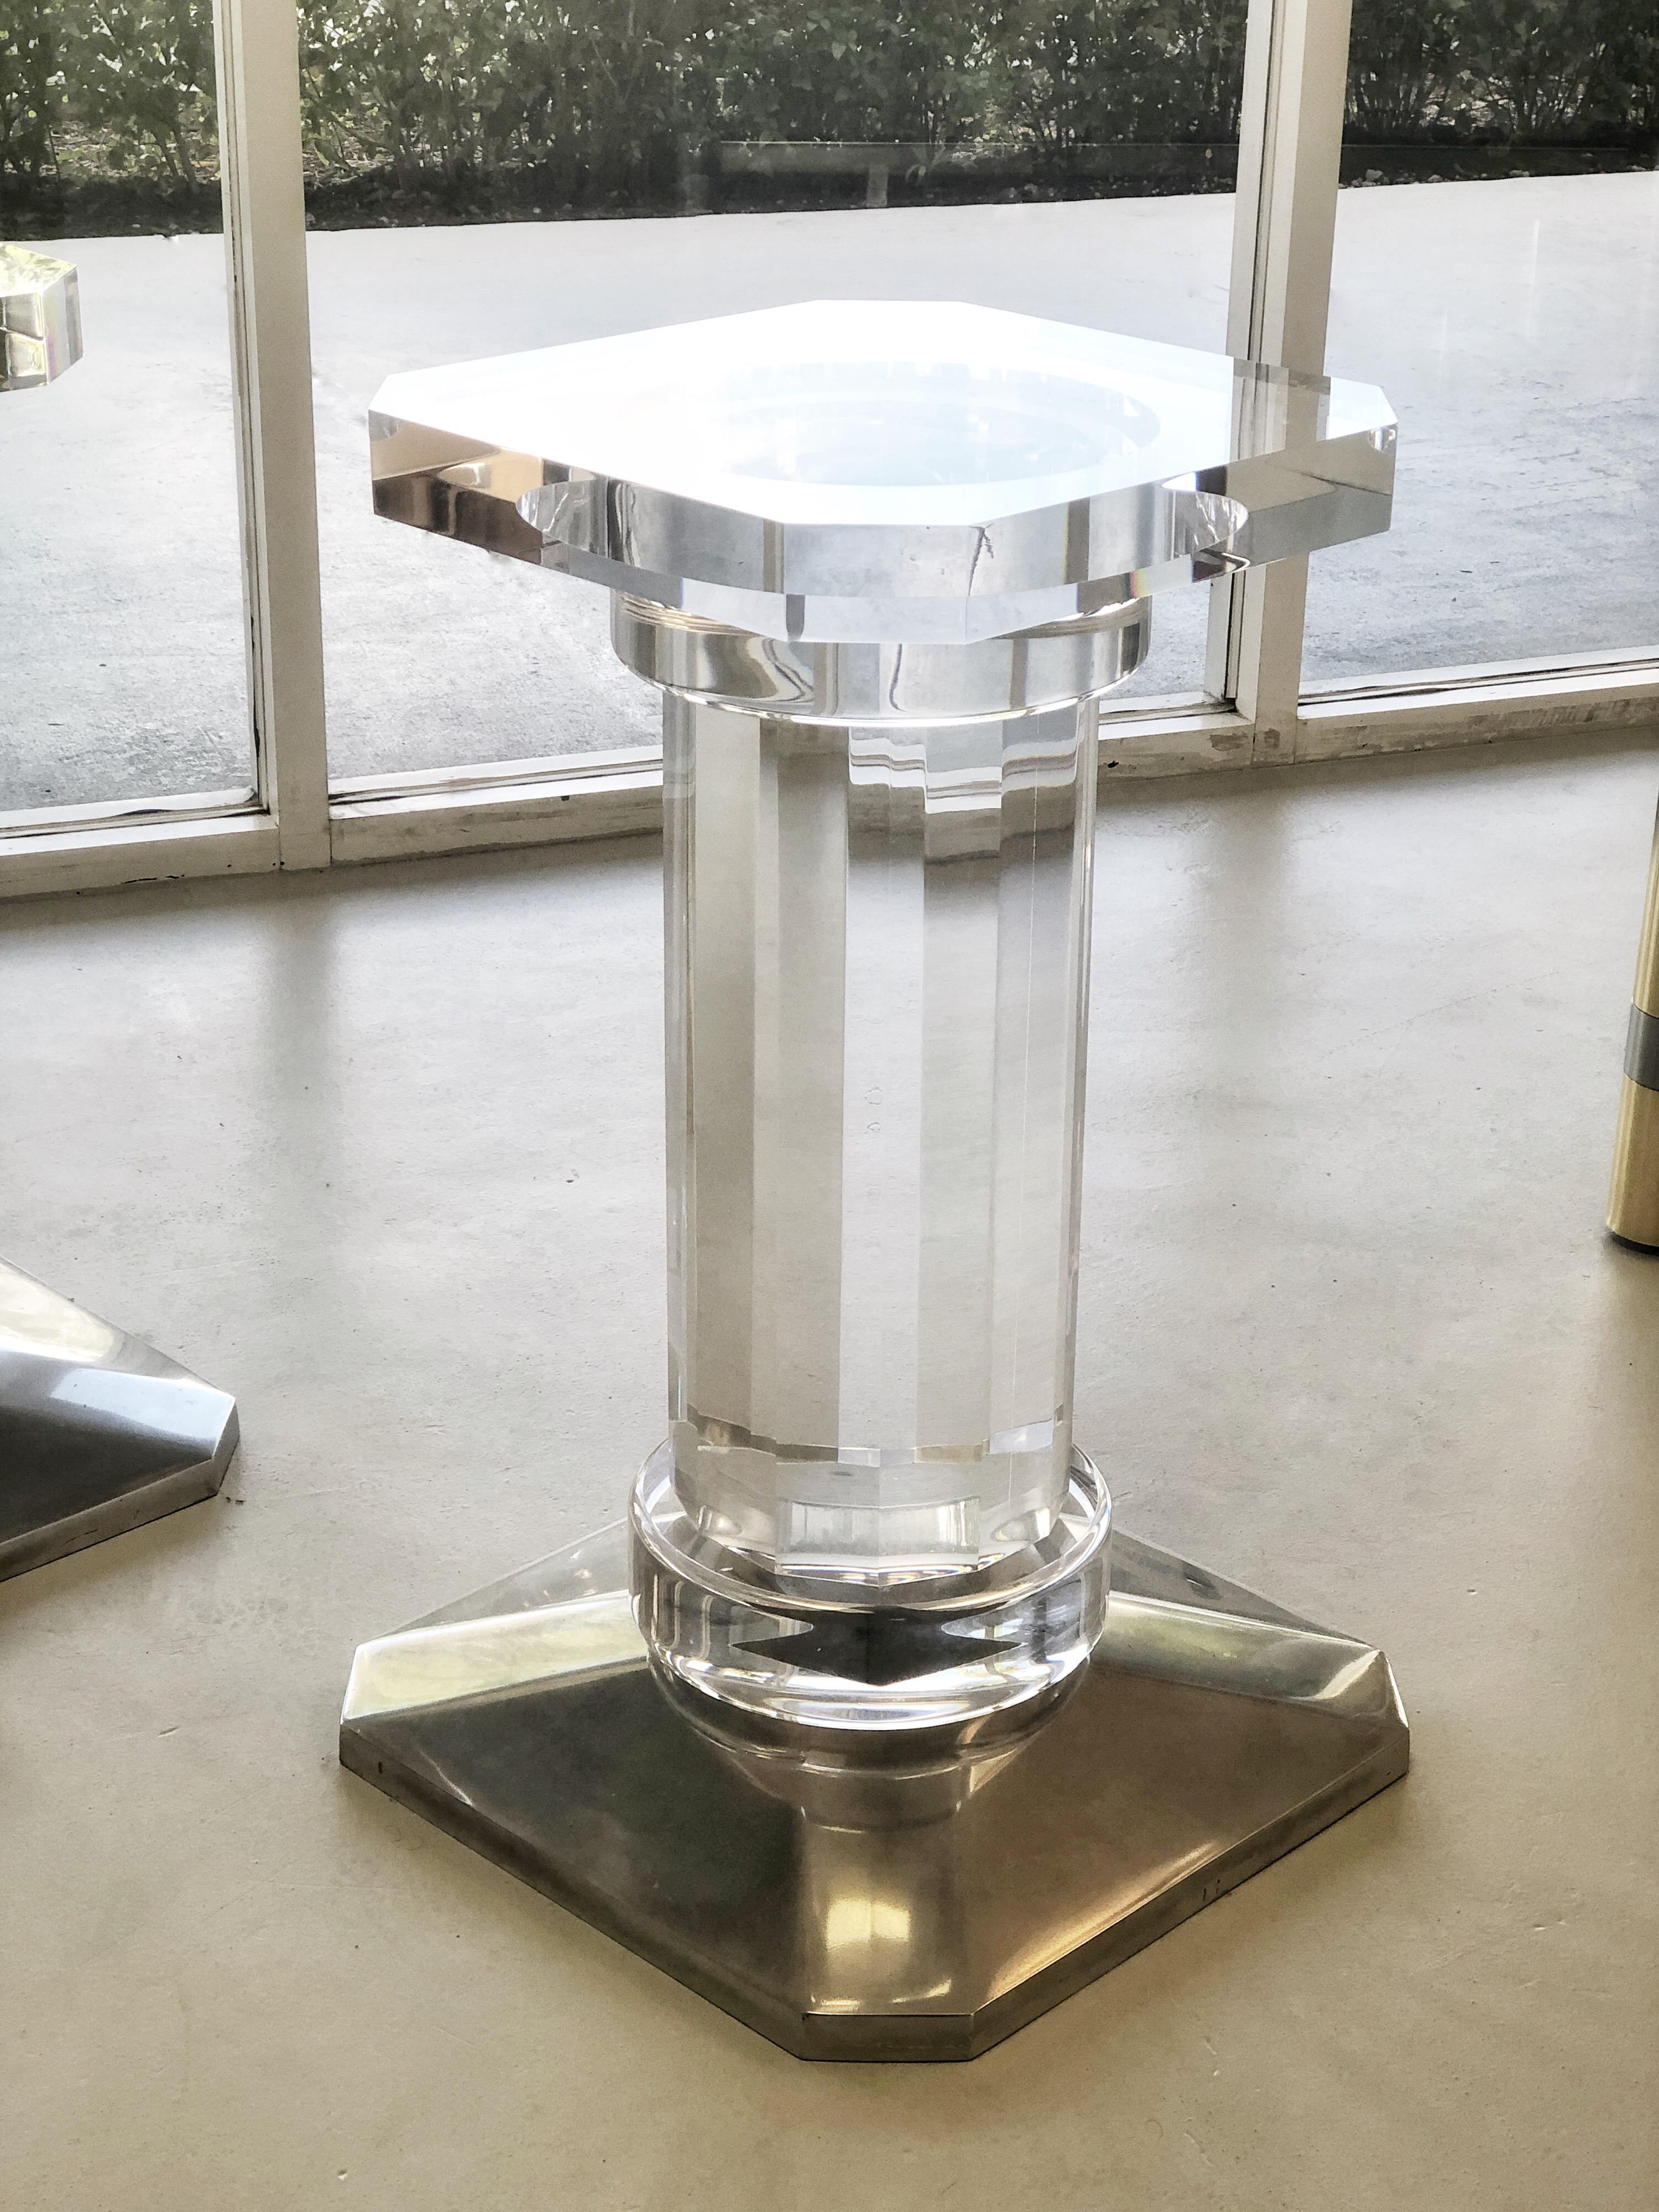 This is a pair of solid Lucite bases with polished aluminum elements for a dining or conference table. Very clear and crisp detail. Quite versatile as would work in any style.